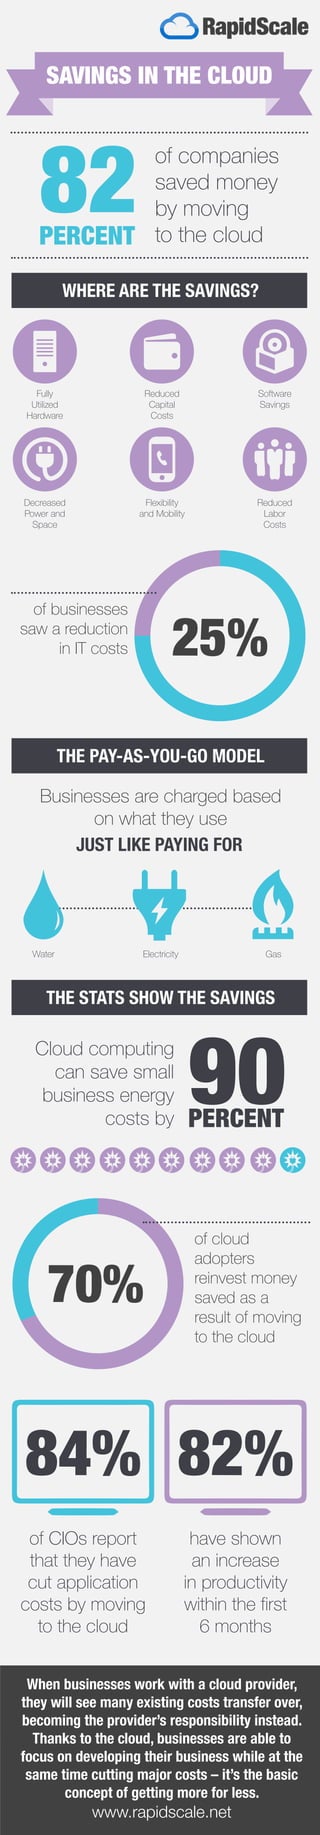 When businesses work with a cloud provider,
they will see many existing costs transfer over,
becoming the provider’s responsibility instead.
Thanks to the cloud, businesses are able to
focus on developing their business while at the
same time cutting major costs – it’s the basic
concept of getting more for less.
www.rapidscale.net
WHERE ARE THE SAVINGS?
THE PAY-AS-YOU-GO MODEL
THE STATS SHOW THE SAVINGS
of companies
saved money
by moving
to the cloud
82PERCENT
Cloud computing
can save small
business energy
costs by
of CIOs report
that they have
cut application
costs by moving
to the cloud
90PERCENT
Fully
Utilized
Hardware
Reduced
Capital
Costs
Software
Savings
Reduced
Labor
Costs
Flexibility
and Mobility
Decreased
Power and
Space
25%
of businesses
saw a reduction
in IT costs
JUST LIKE PAYING FOR
Water Electricity Gas
84%
have shown
an increase
in productivity
within the first
6 months
82%
70%
of cloud
adopters
reinvest money
saved as a
result of moving
to the cloud
SAVINGS IN THE CLOUD
Businesses are charged based
on what they use
 